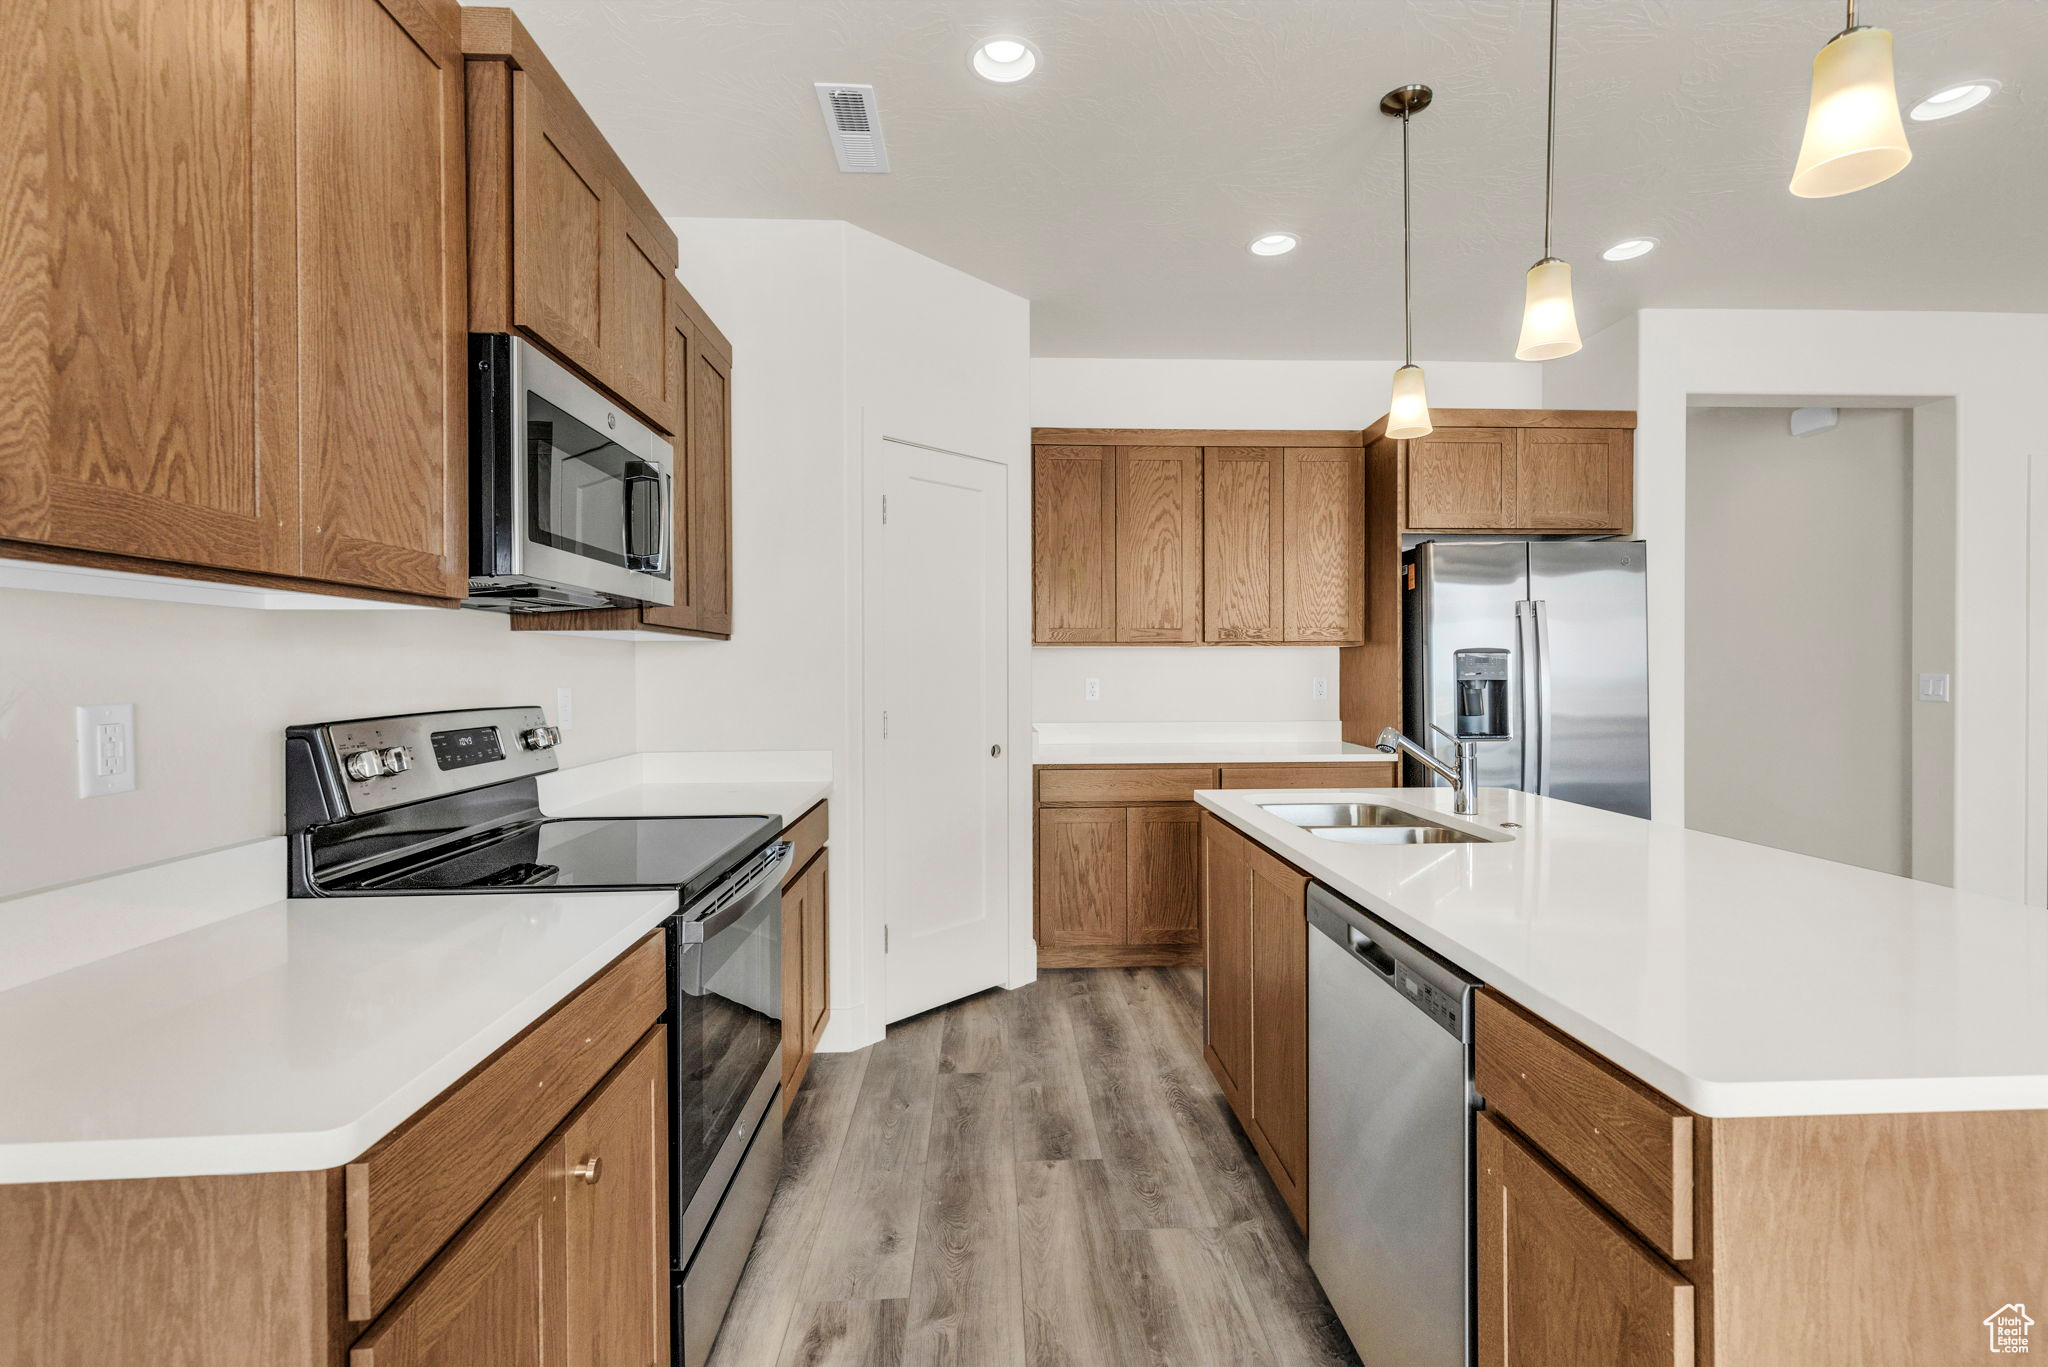 Kitchen featuring light wood-type flooring, pendant lighting, stainless steel appliances, a kitchen island with sink, and sink